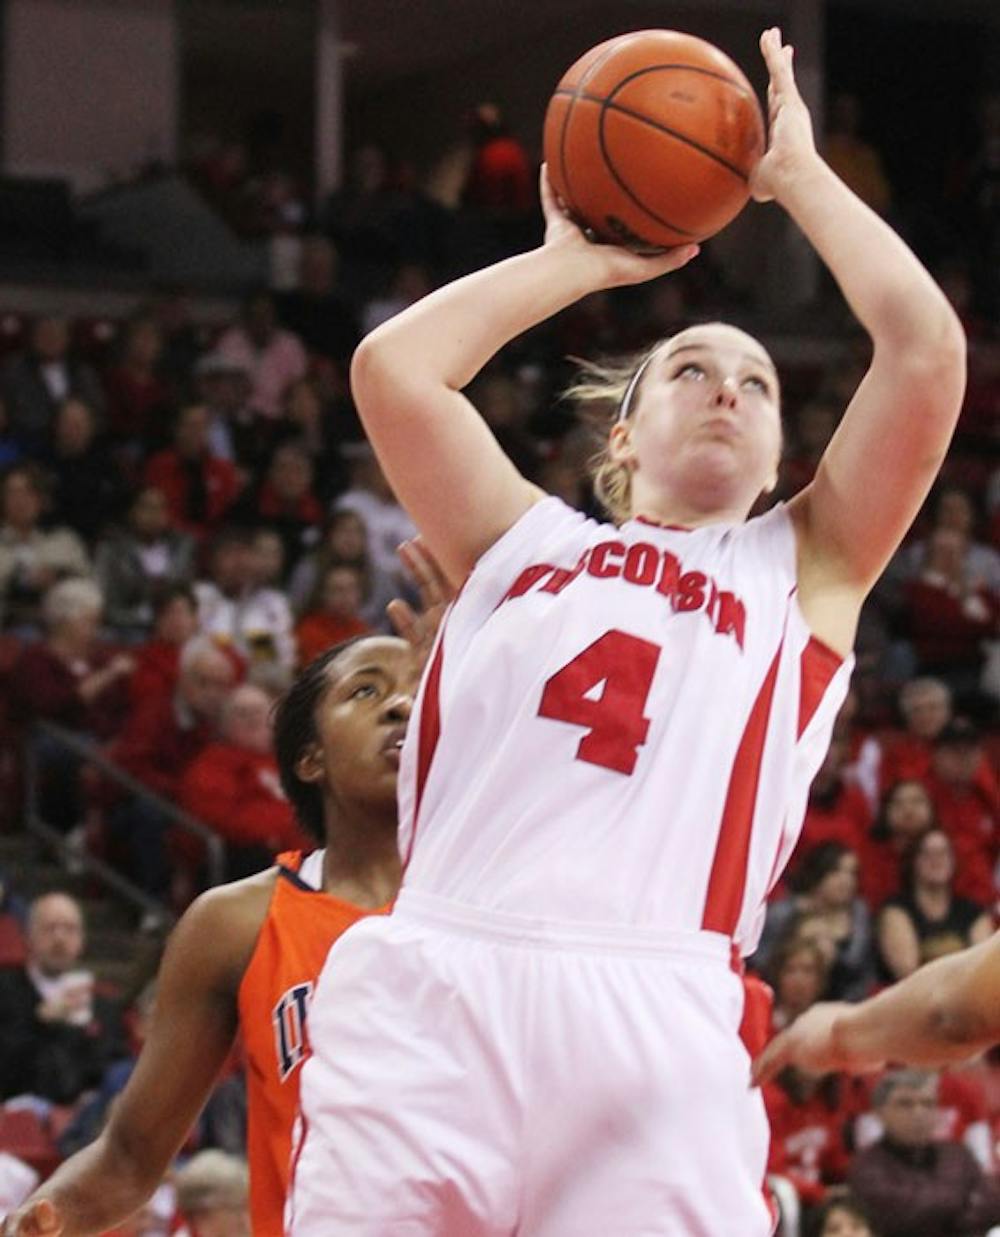 Steinbauer shines as Badgers keep improving in win over Ilini